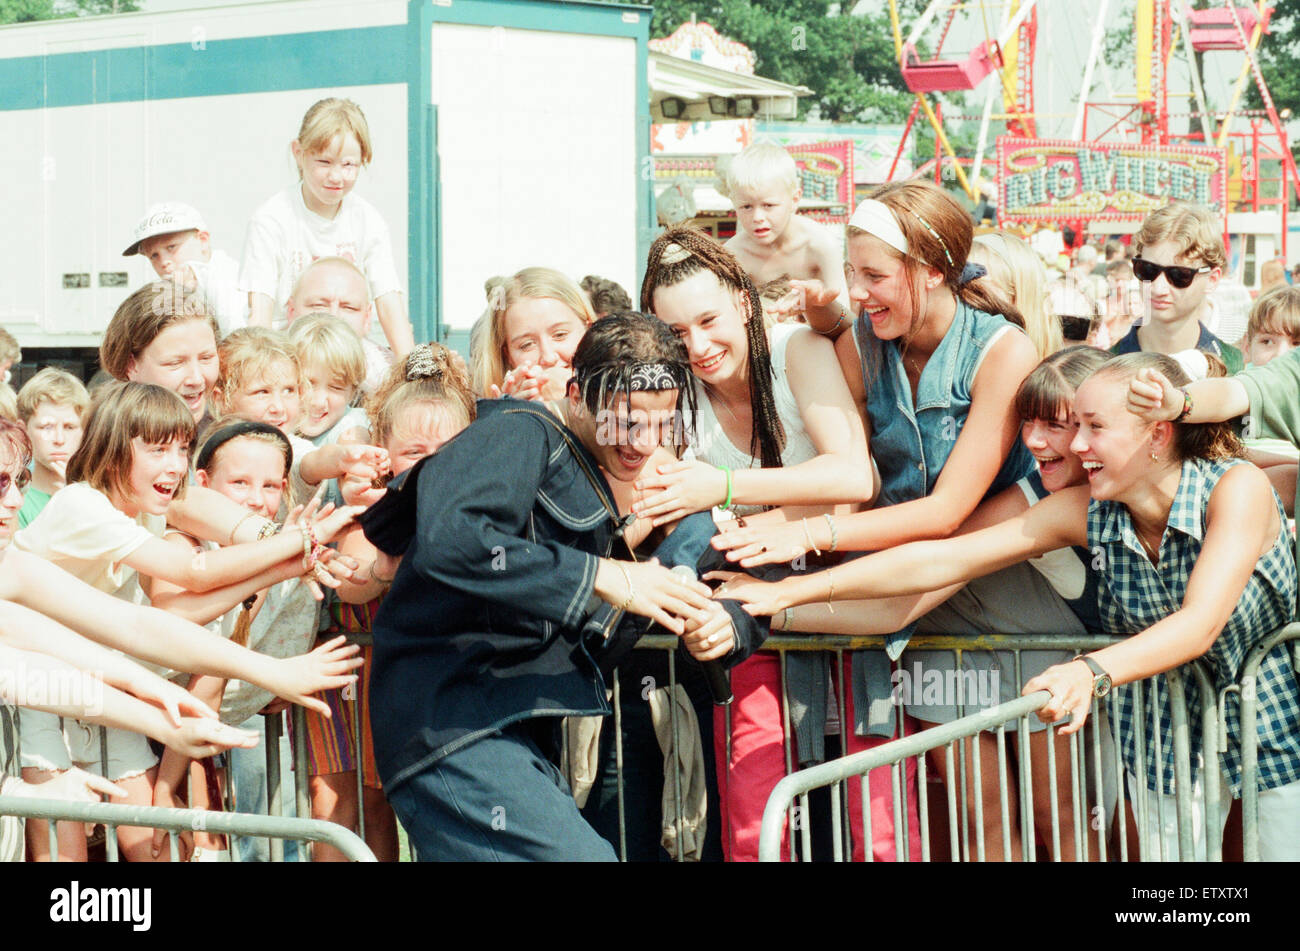 Peter Andre, performs at Fun Day, Stewart Park, Marton, Middlesbrough, England, 20th August 1995. Stock Photo